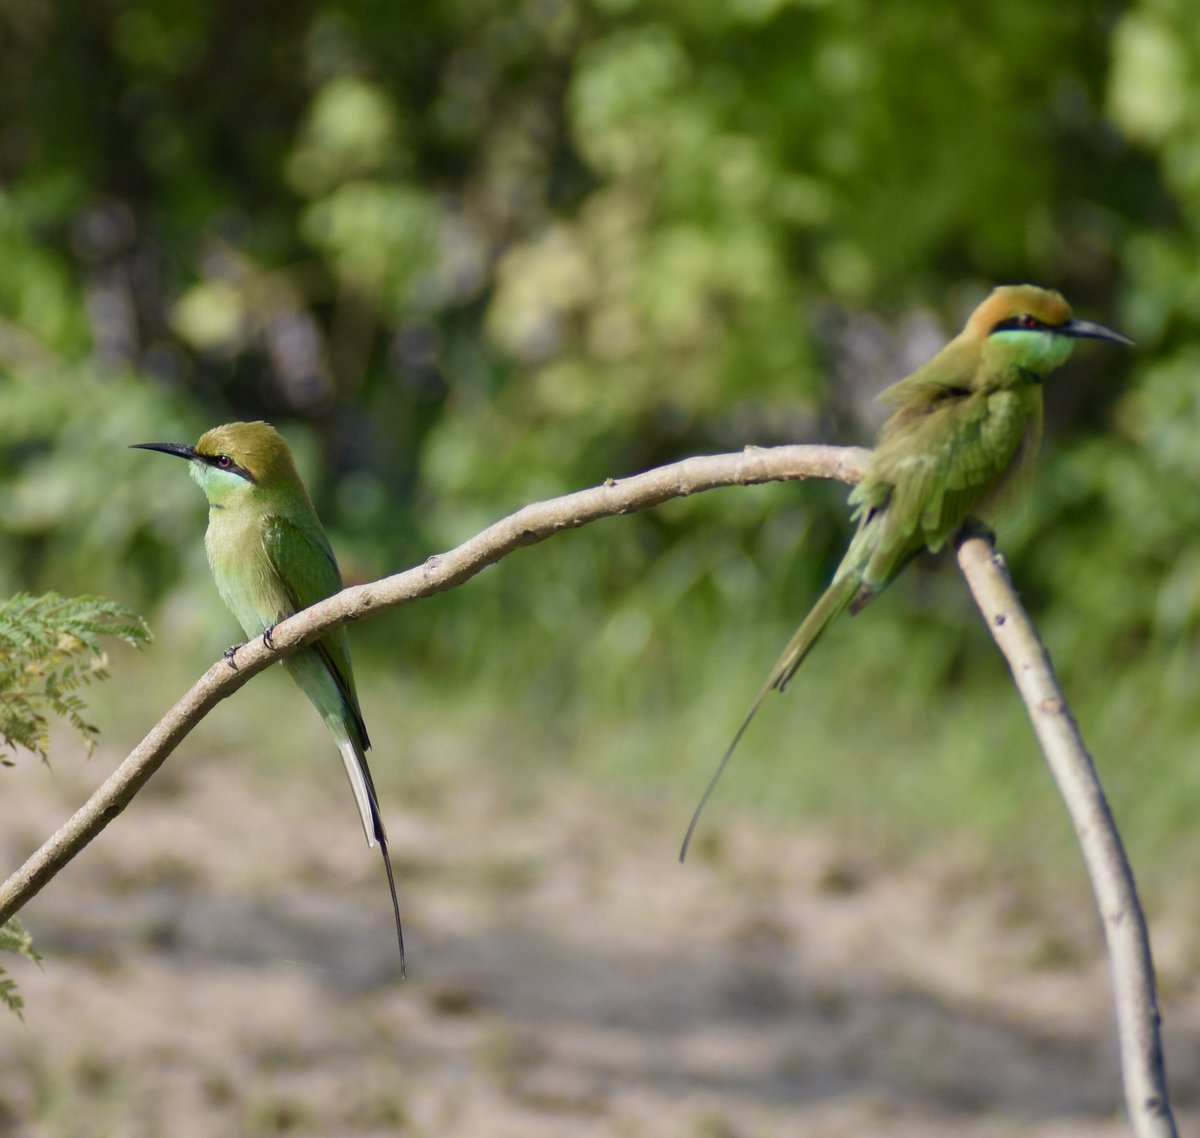 Some times disagreements are fine Green bee eaters 
#IndiAves #TwitterNatureCommunity #birdwatching #birding #ThePhotoHour #BBCPOTD